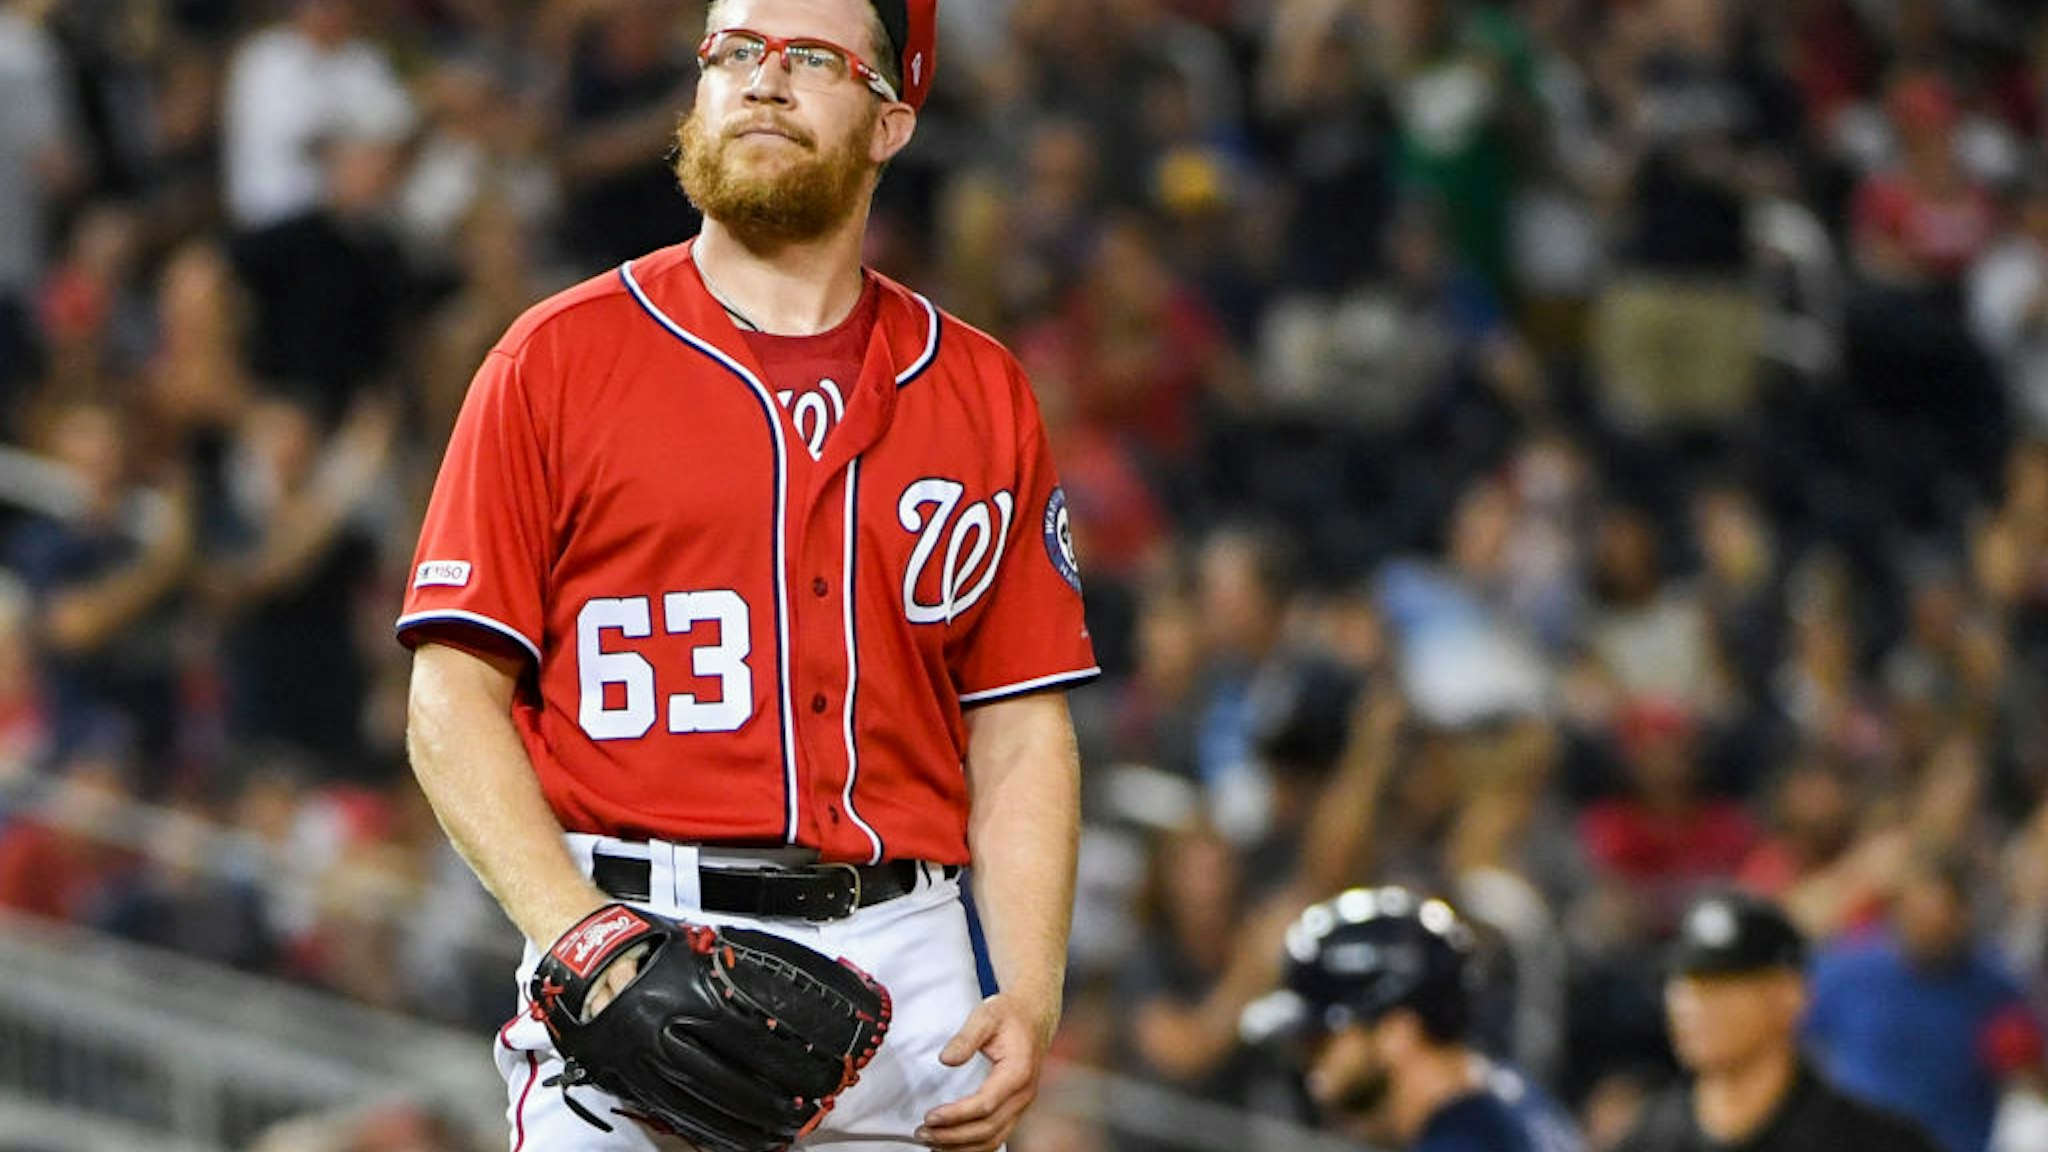 Washington Nationals relief pitcher Sean Doolittle (63) reacts after giving up a two run home run to Milwaukee Brewers third baseman Mike Moustakas (11) in the ninth inning at Nationals Park.